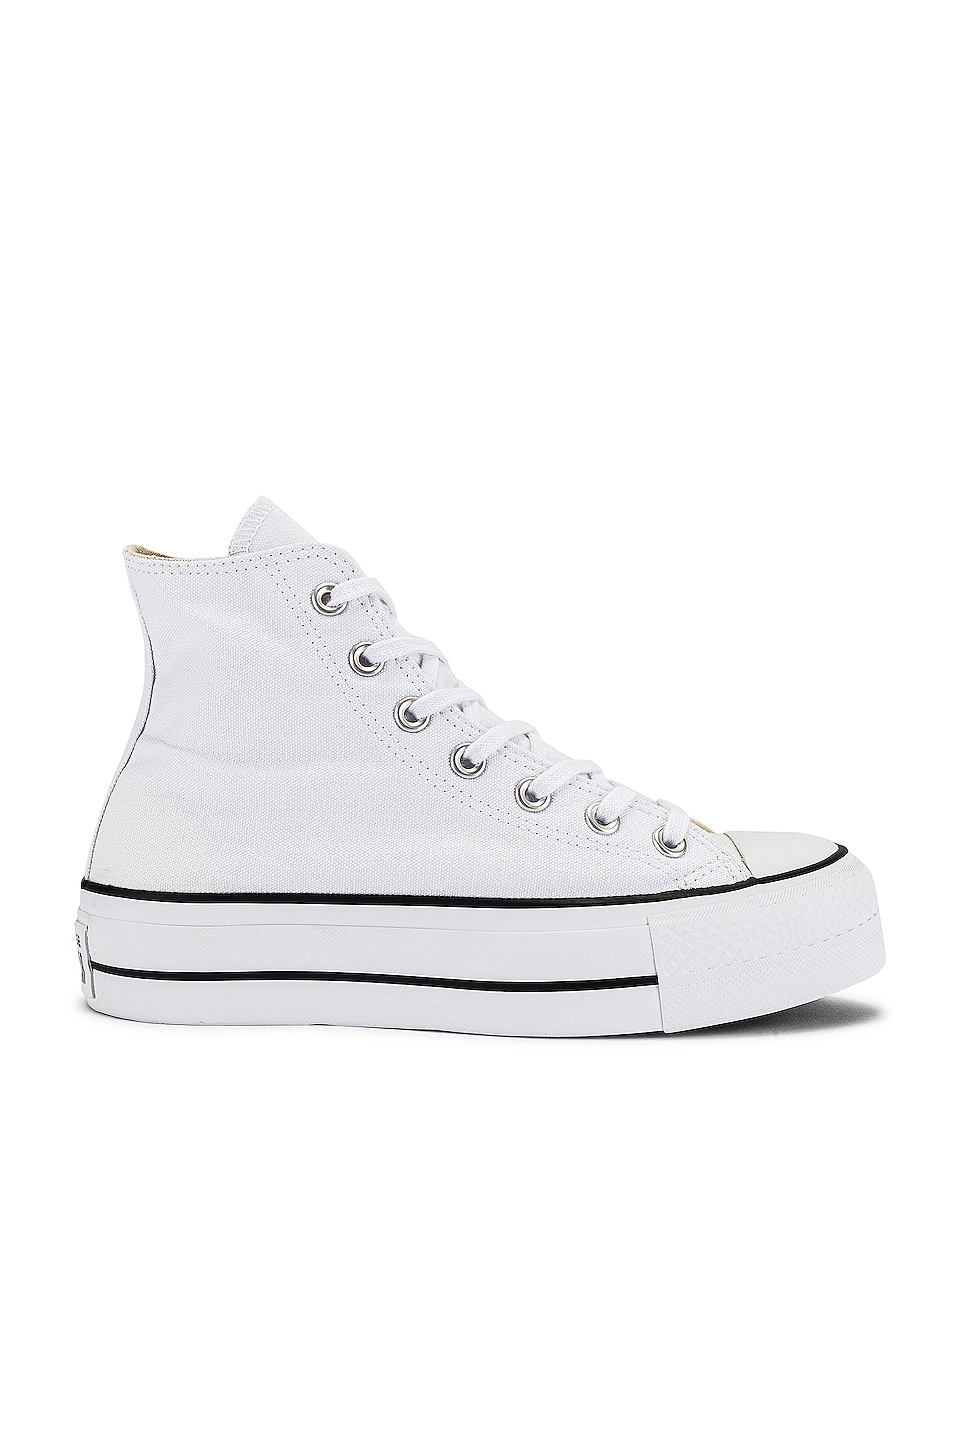 Image 1 of Chuck Taylor All Star Lift Hi Sneaker in White & Black